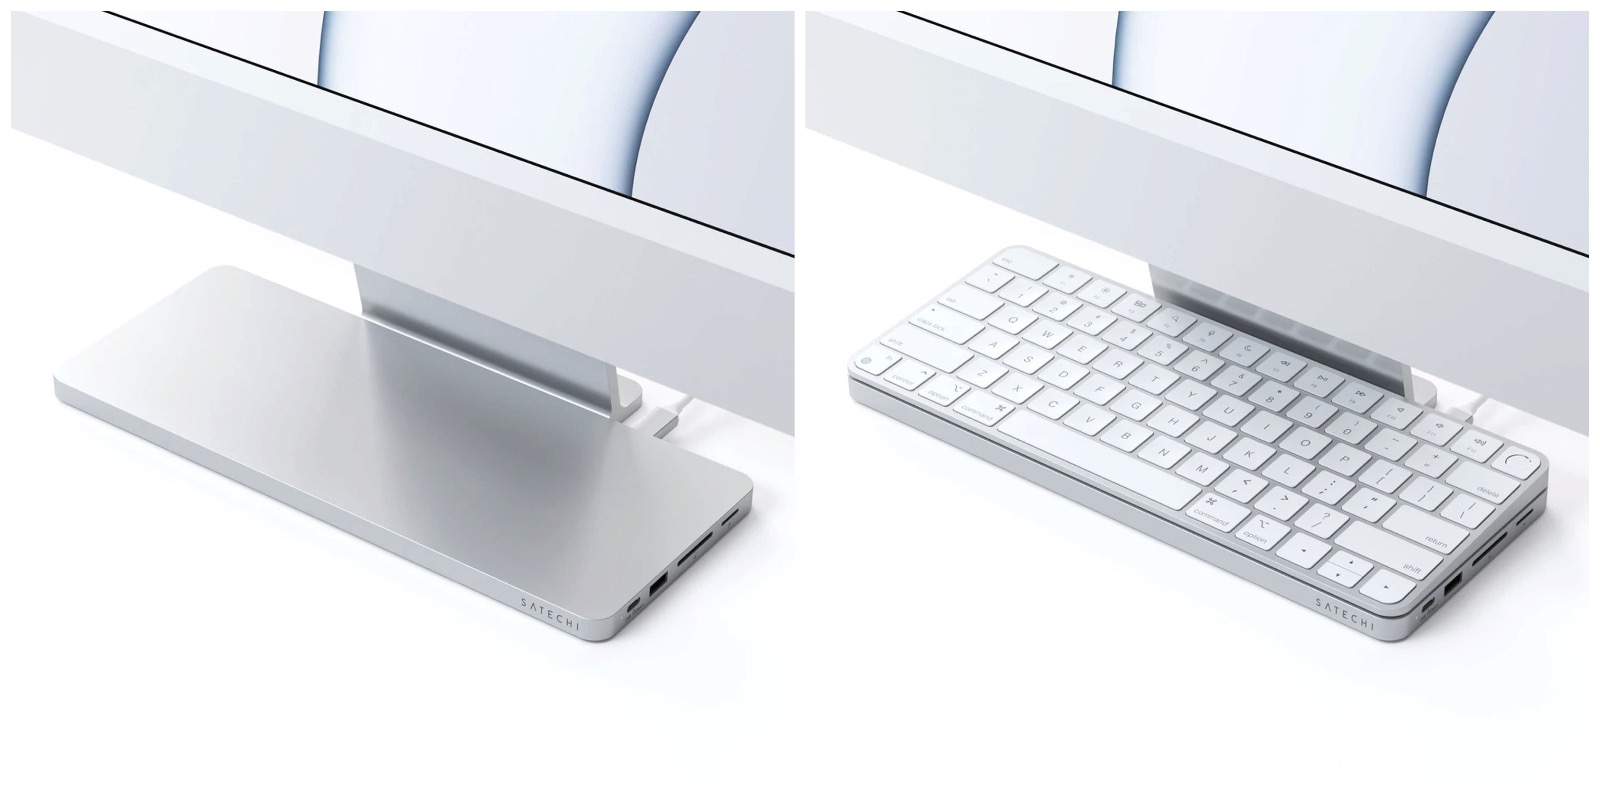 Satechi 24inch M1 iMac SSD Expansion Dock 04 05